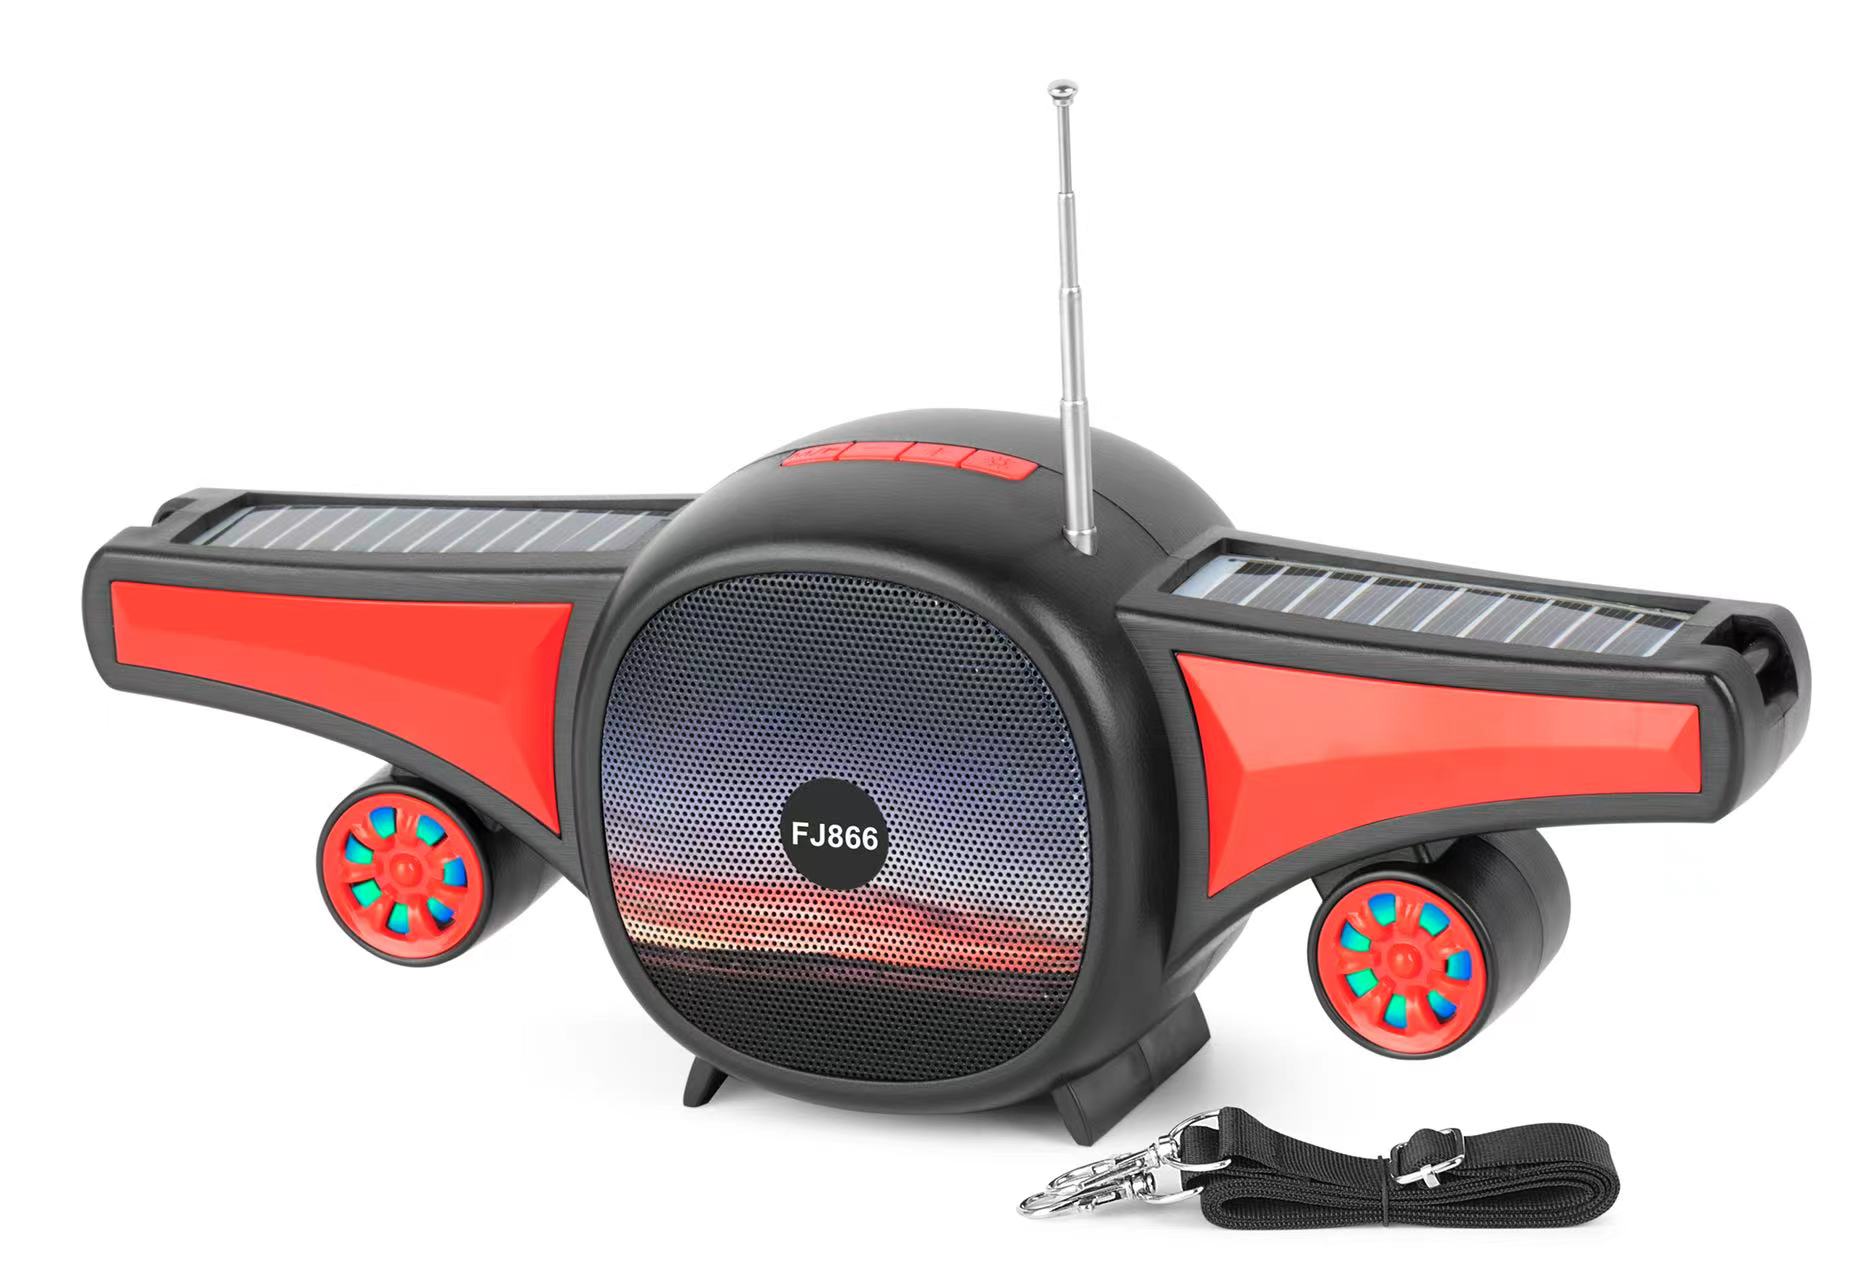 Cool Jet Airplane Colorful Portable Stereo Bluetooth Wireless Speaker with SOLAR Panel FJ866 (Red)